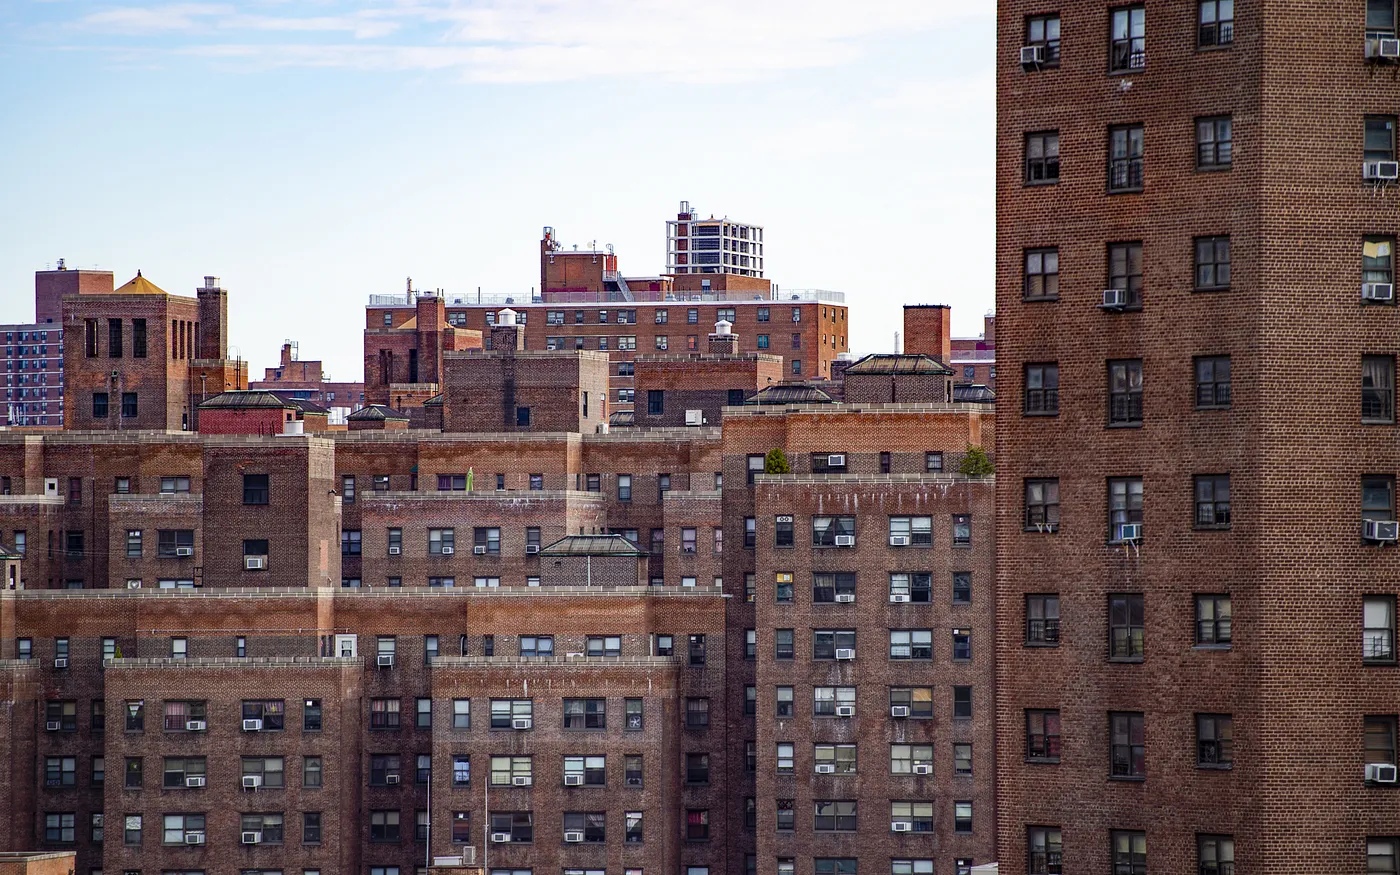 Sprawling brick apartment buildings in New York City